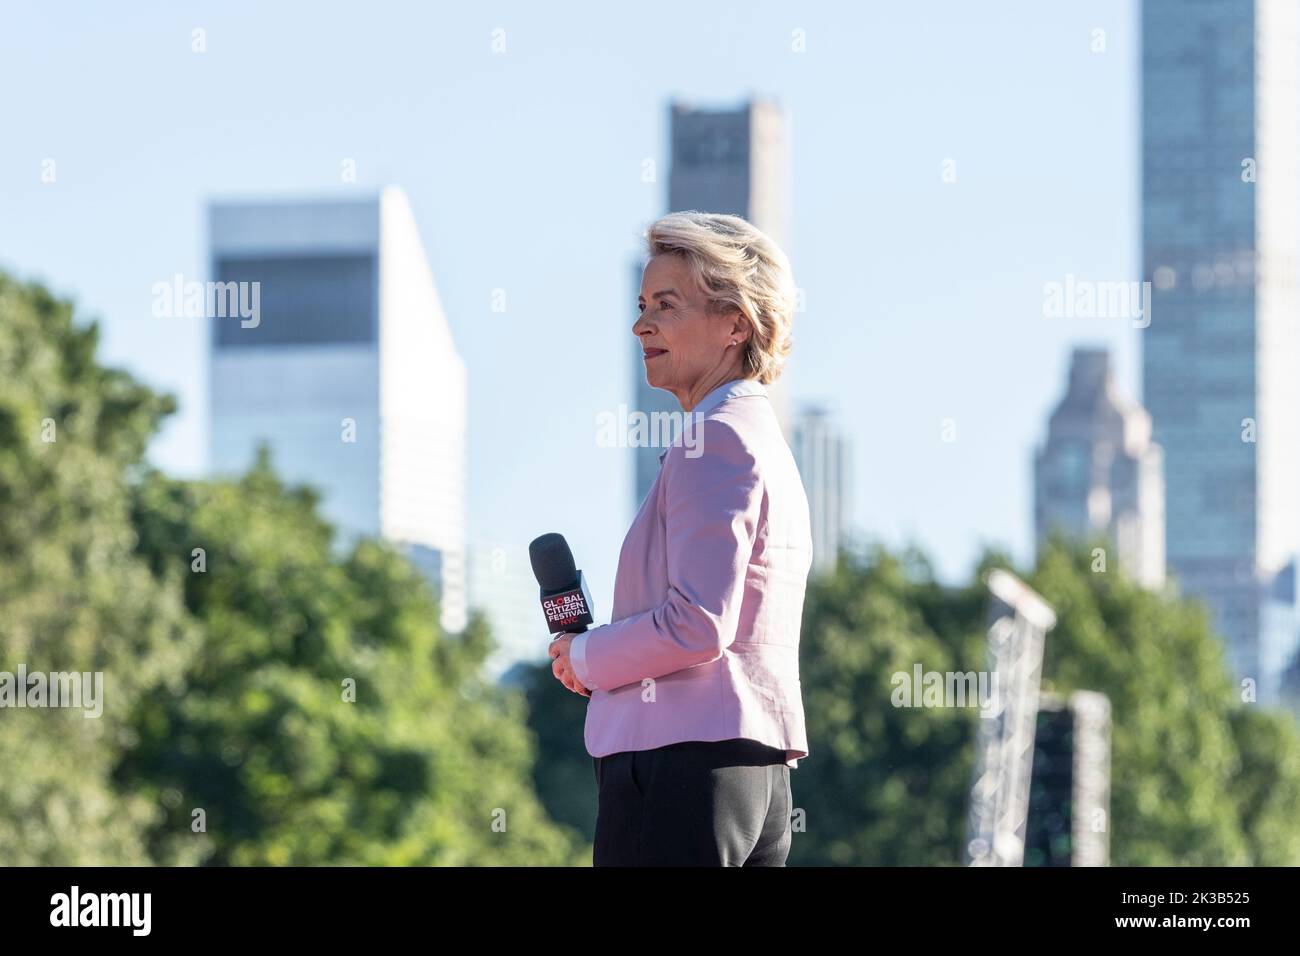 New York, NY - September 24, 2022: The President is the head of the European Commission Ursula von der Leyen speaks at Global Citizen Festival NYC in Central Park Stock Photo